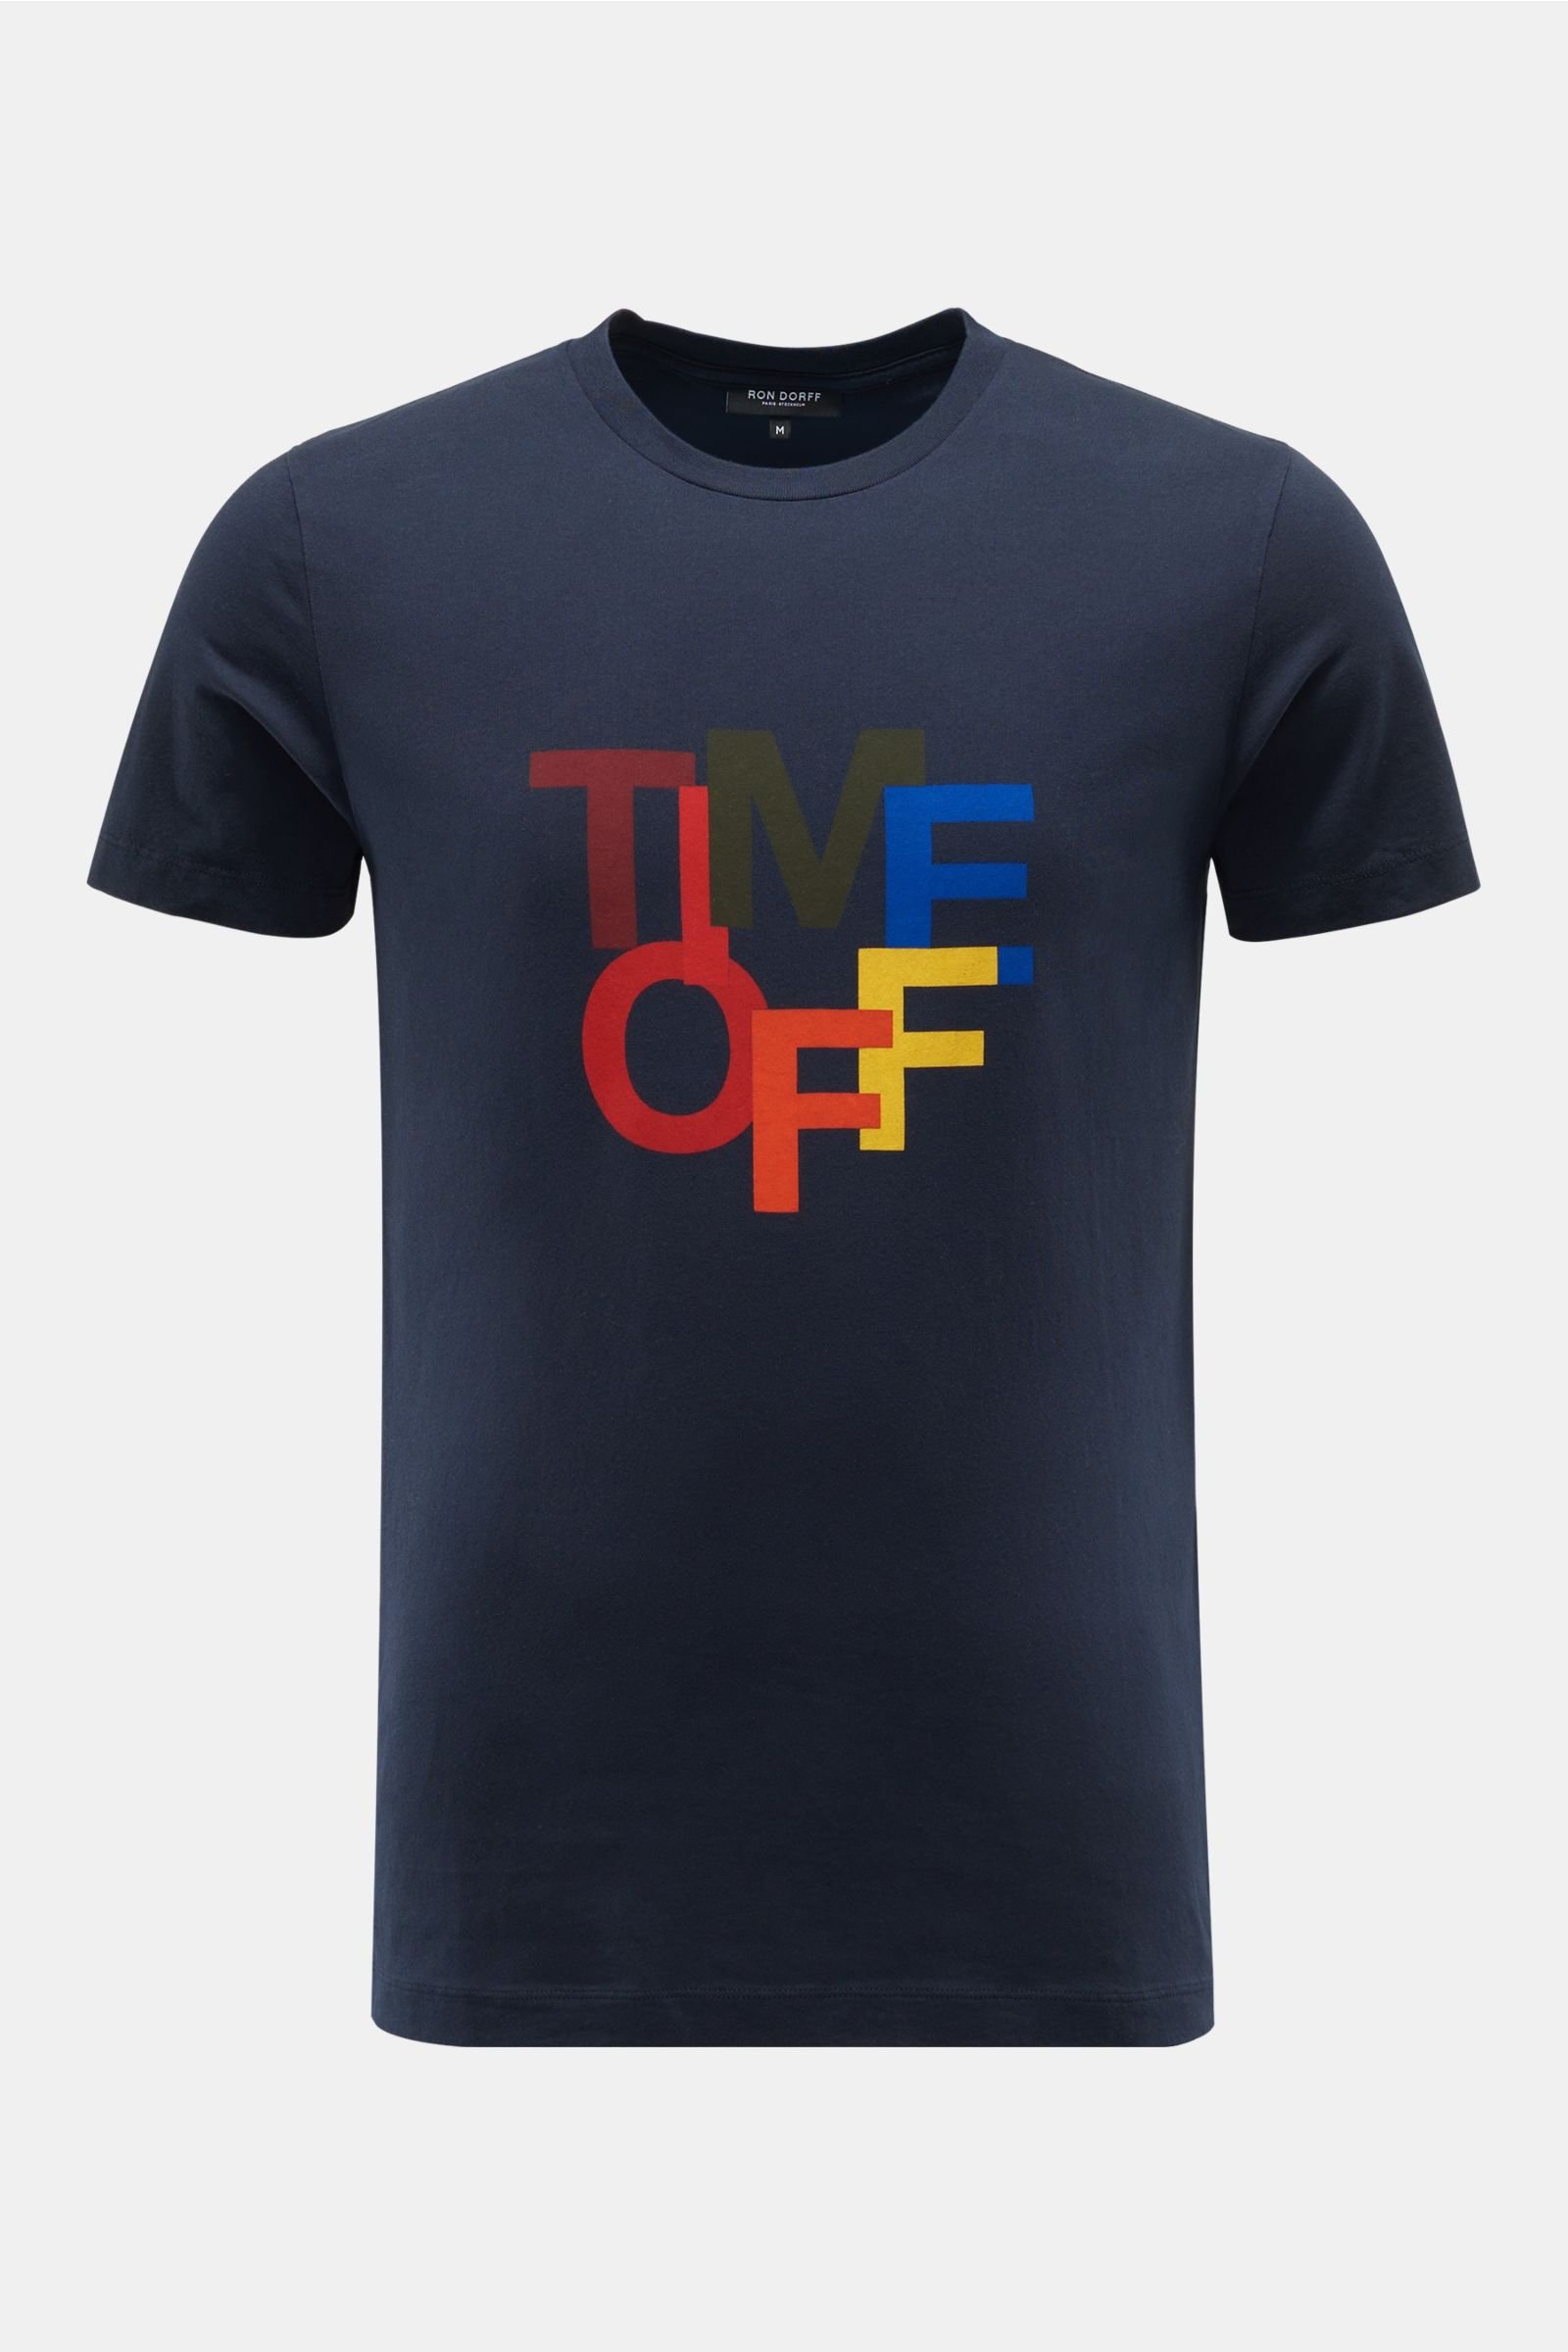 R-Neck T-Shirt 'Time Off' navy